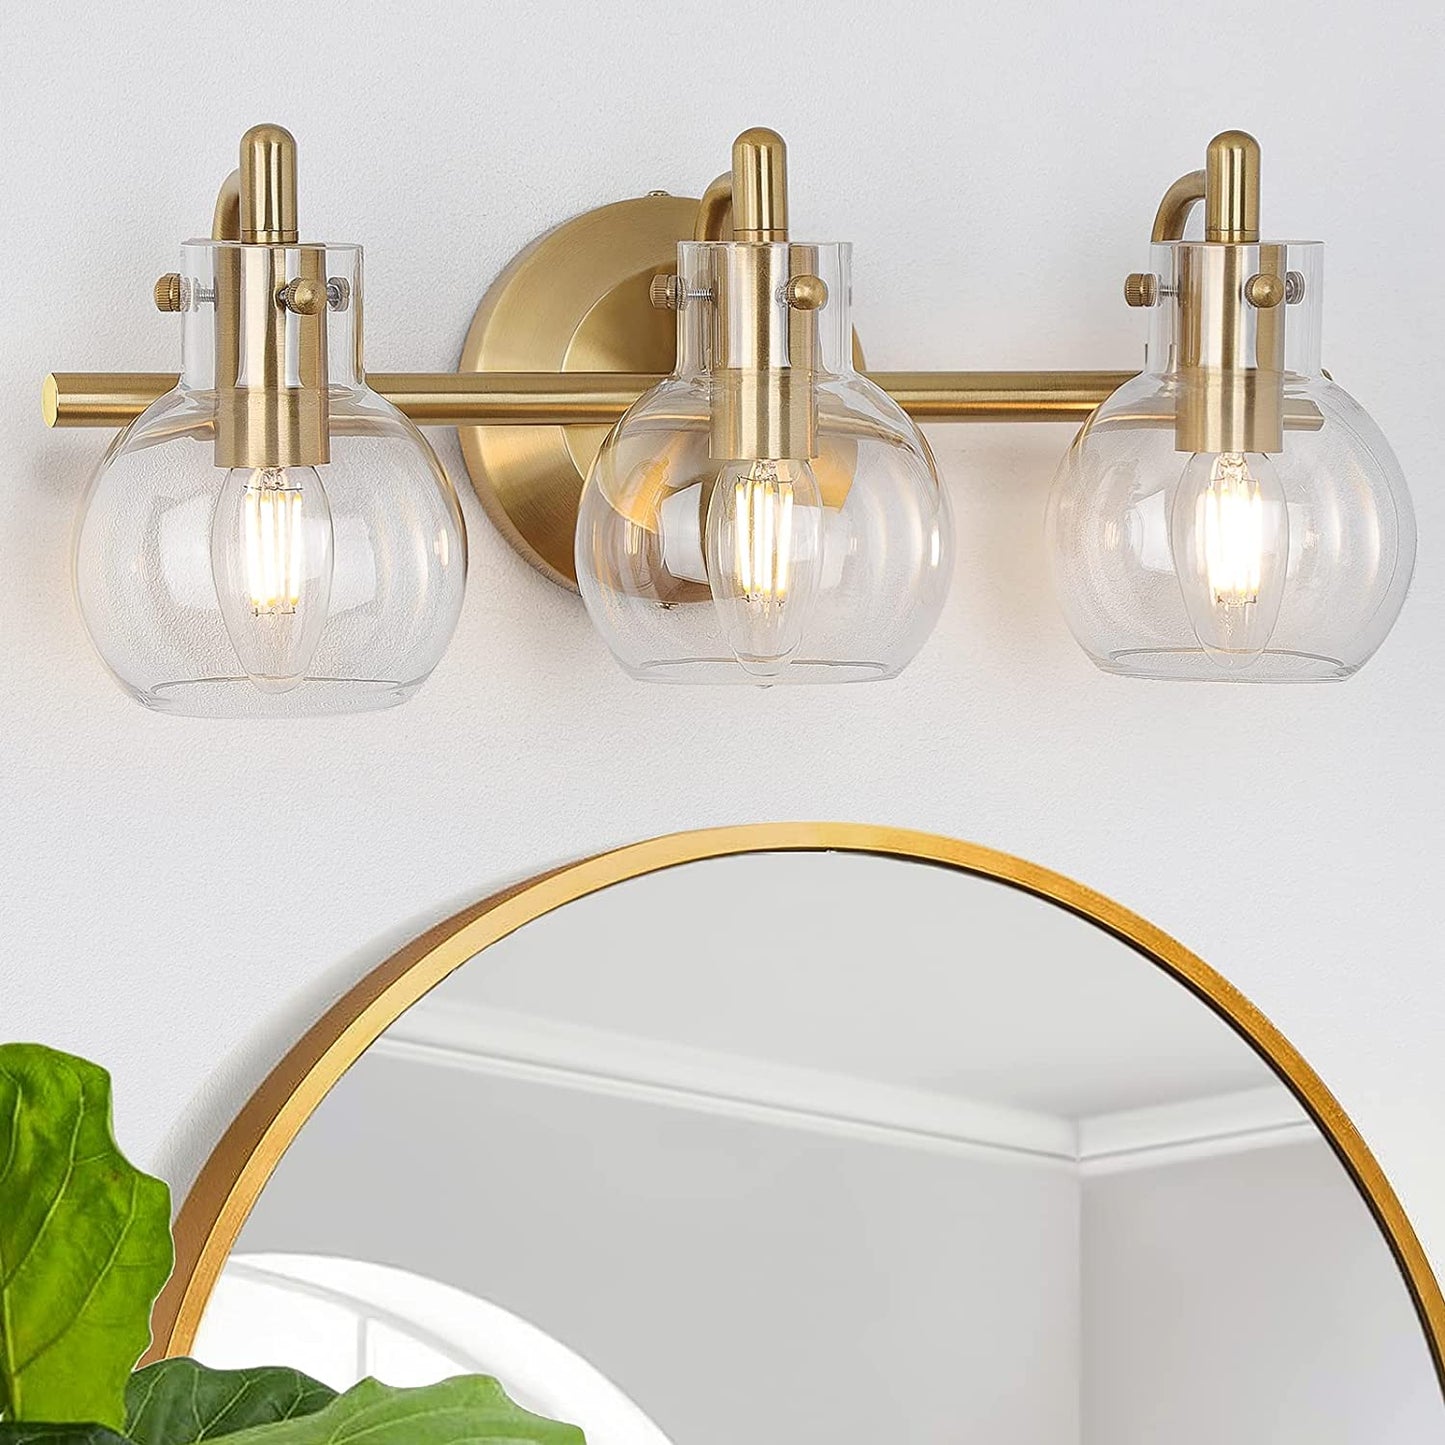 Vanity Light Fixtures, Modern 3 Lights Wall Sconce Lighting Matte Black, Farmhouse Metal Wall Lamp with Globe Glass Shade, Porch Wall Mount Light Fixture for Mirror Cabinets Hallway Stairs